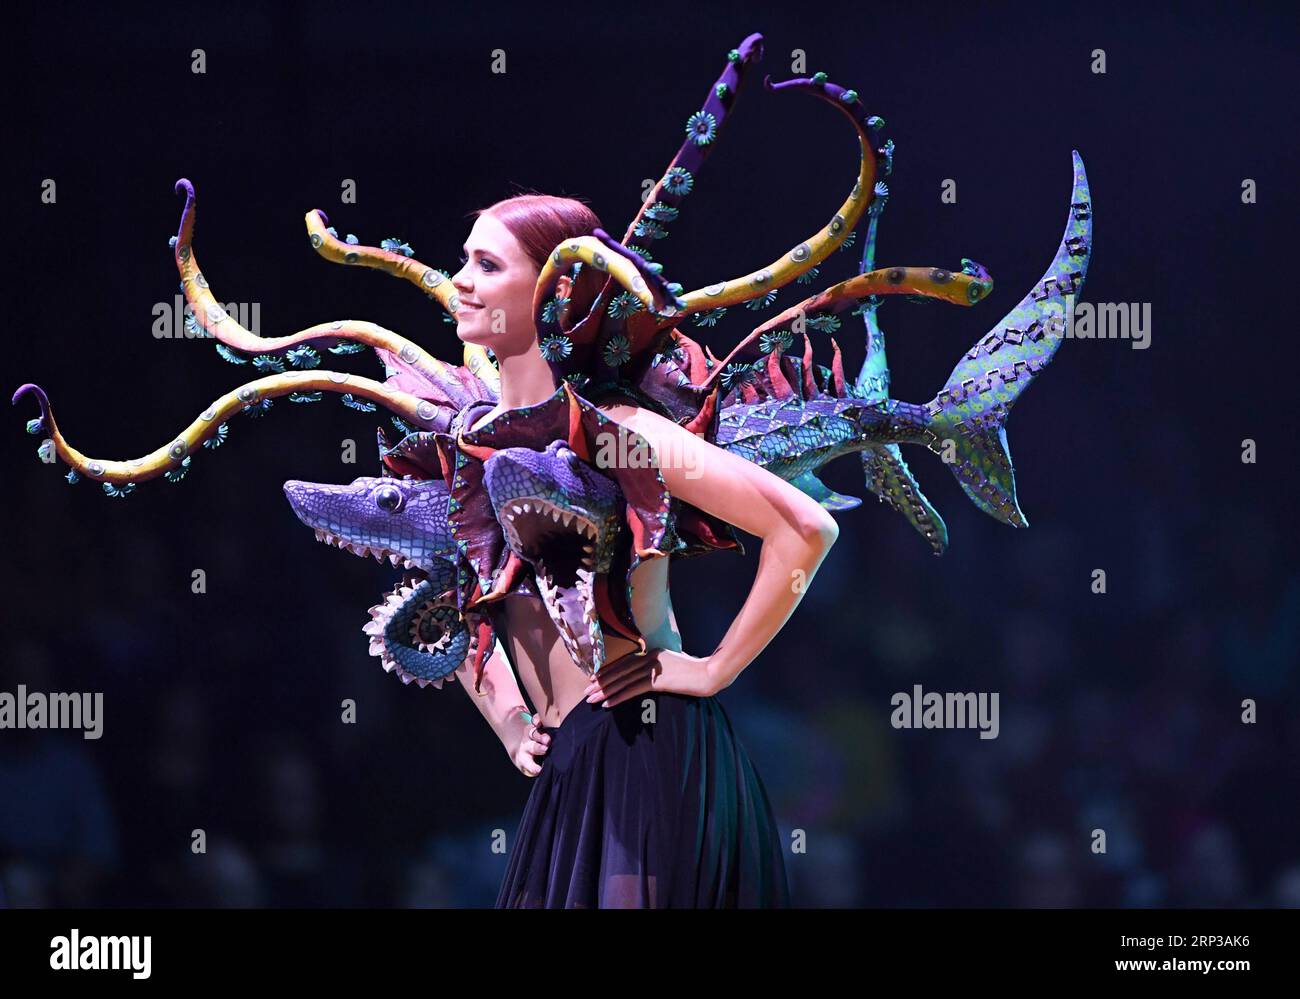 (180928) -- WELLINGTON, Sept. 28, 2018 -- A model presents creations during the annual World of Wearable Art Awards Show in Wellington, New Zealand, on Sept. 28, 2018. (Xinhua Photo/)(zhf) NEW ZEALAND-WELLINGTON-WORLD OF WEARABLE ART AWARDS-SHOW GuoxLei PUBLICATIONxNOTxINxCHN Stock Photo